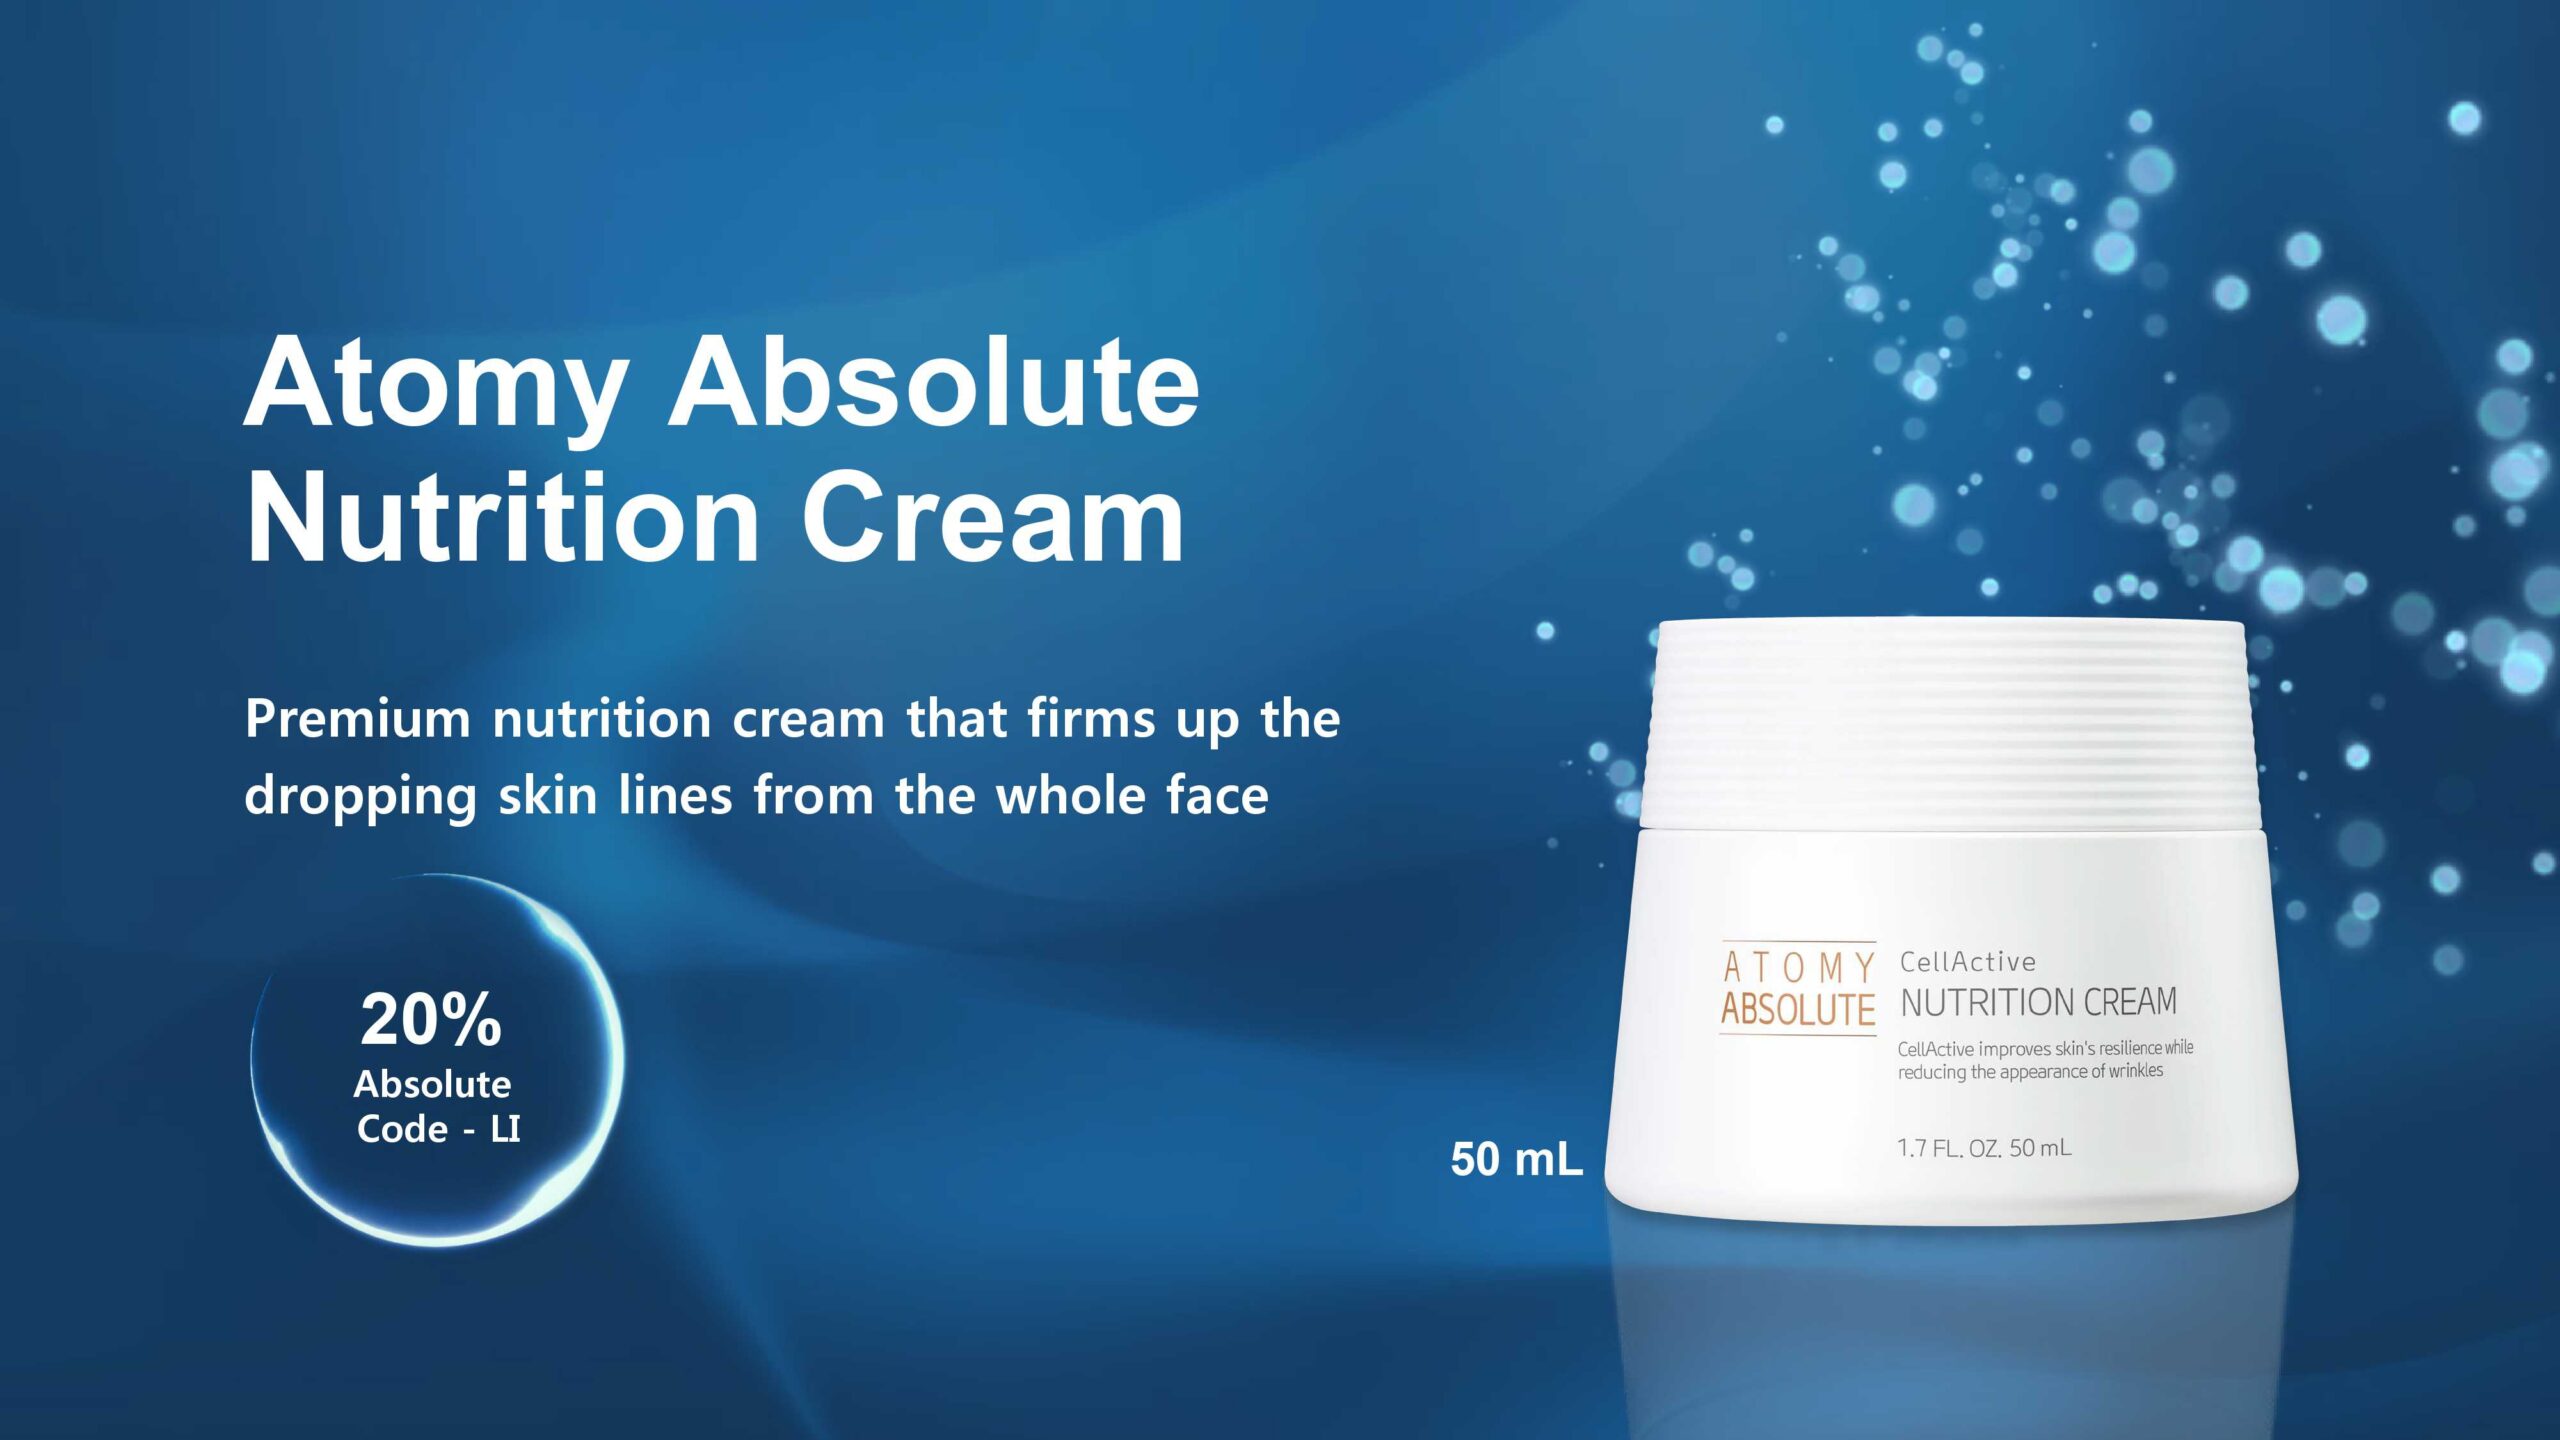 ATOMY Absolute Cell Active Nutrition Cream